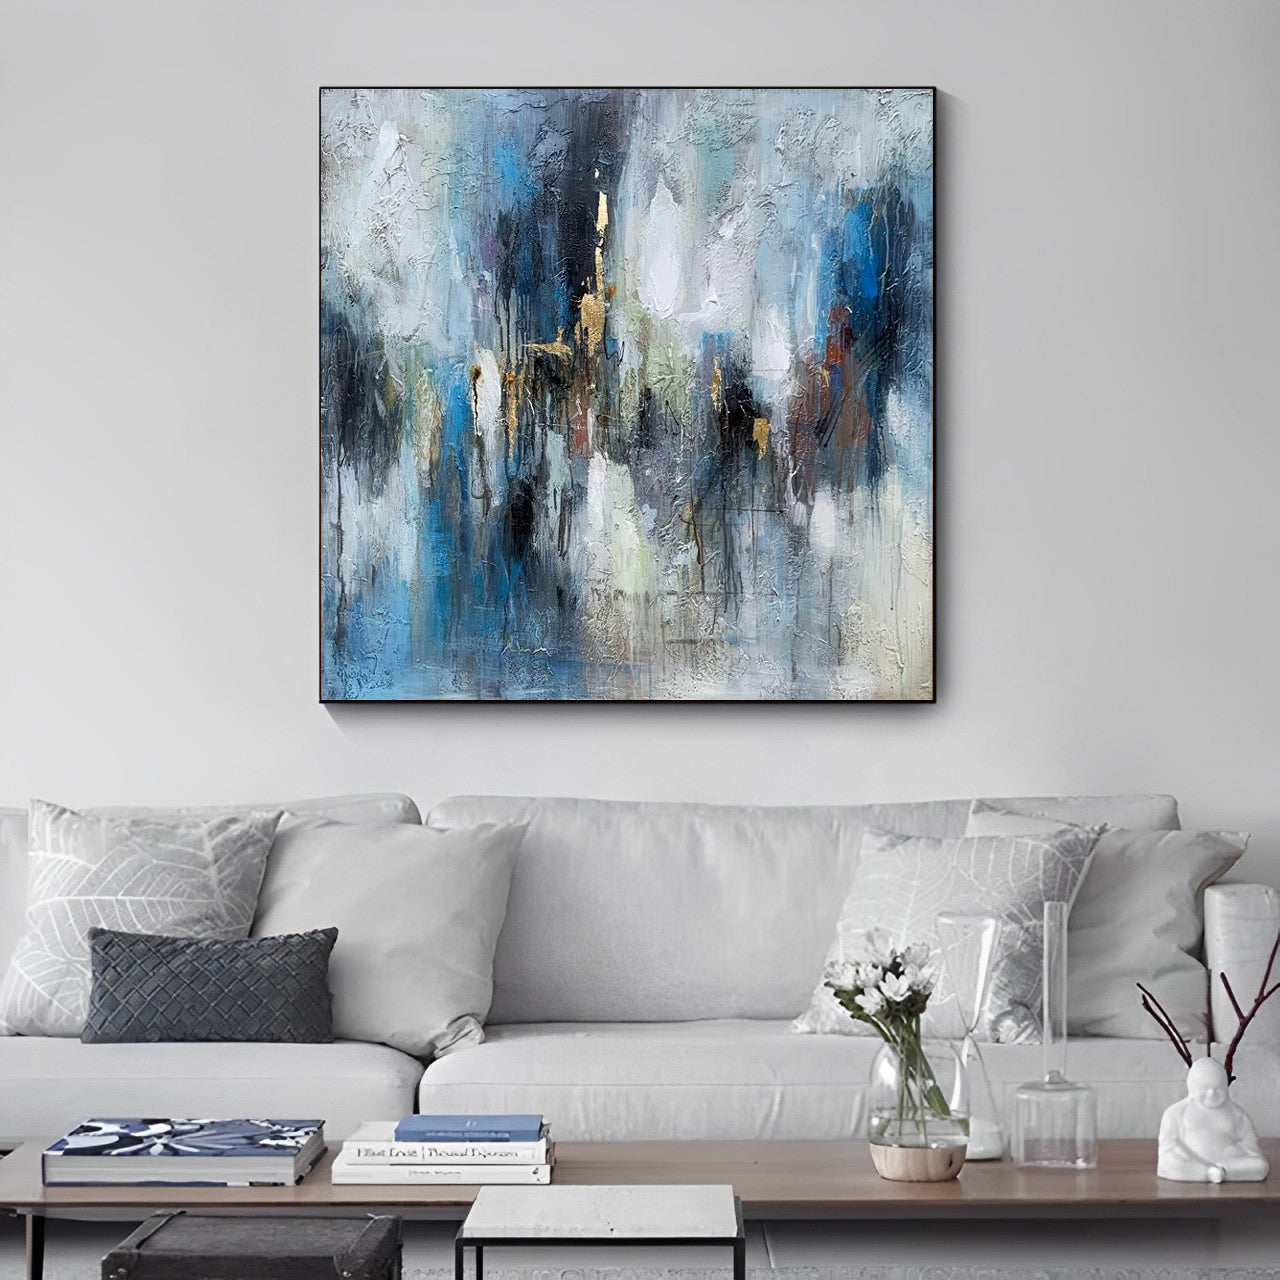 Splash - Abstract Blue and Gold Foil Acrylic Painting on Canvas